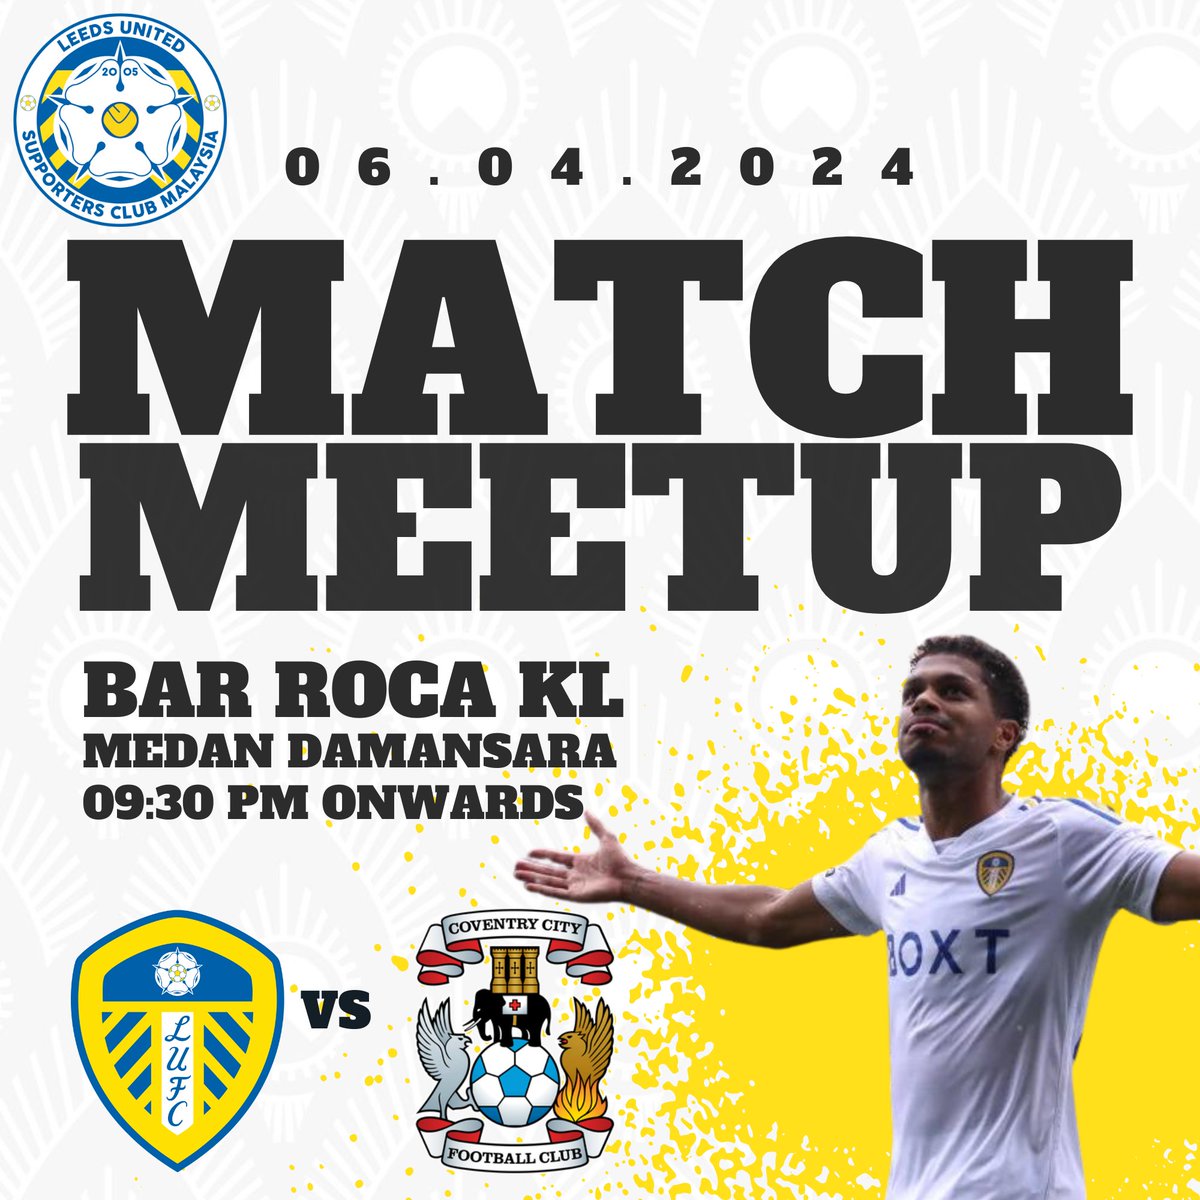 Feels like an eternity since our last match meetup. Come join us tomorrow at Leeds United Malaysia den, Bar Roca KL! We will be there from 9:30pm onwards, send us a DM is you have any questions, see you tomorrow! MOT #LeedsUnited #MOT #ALAW #LUFC